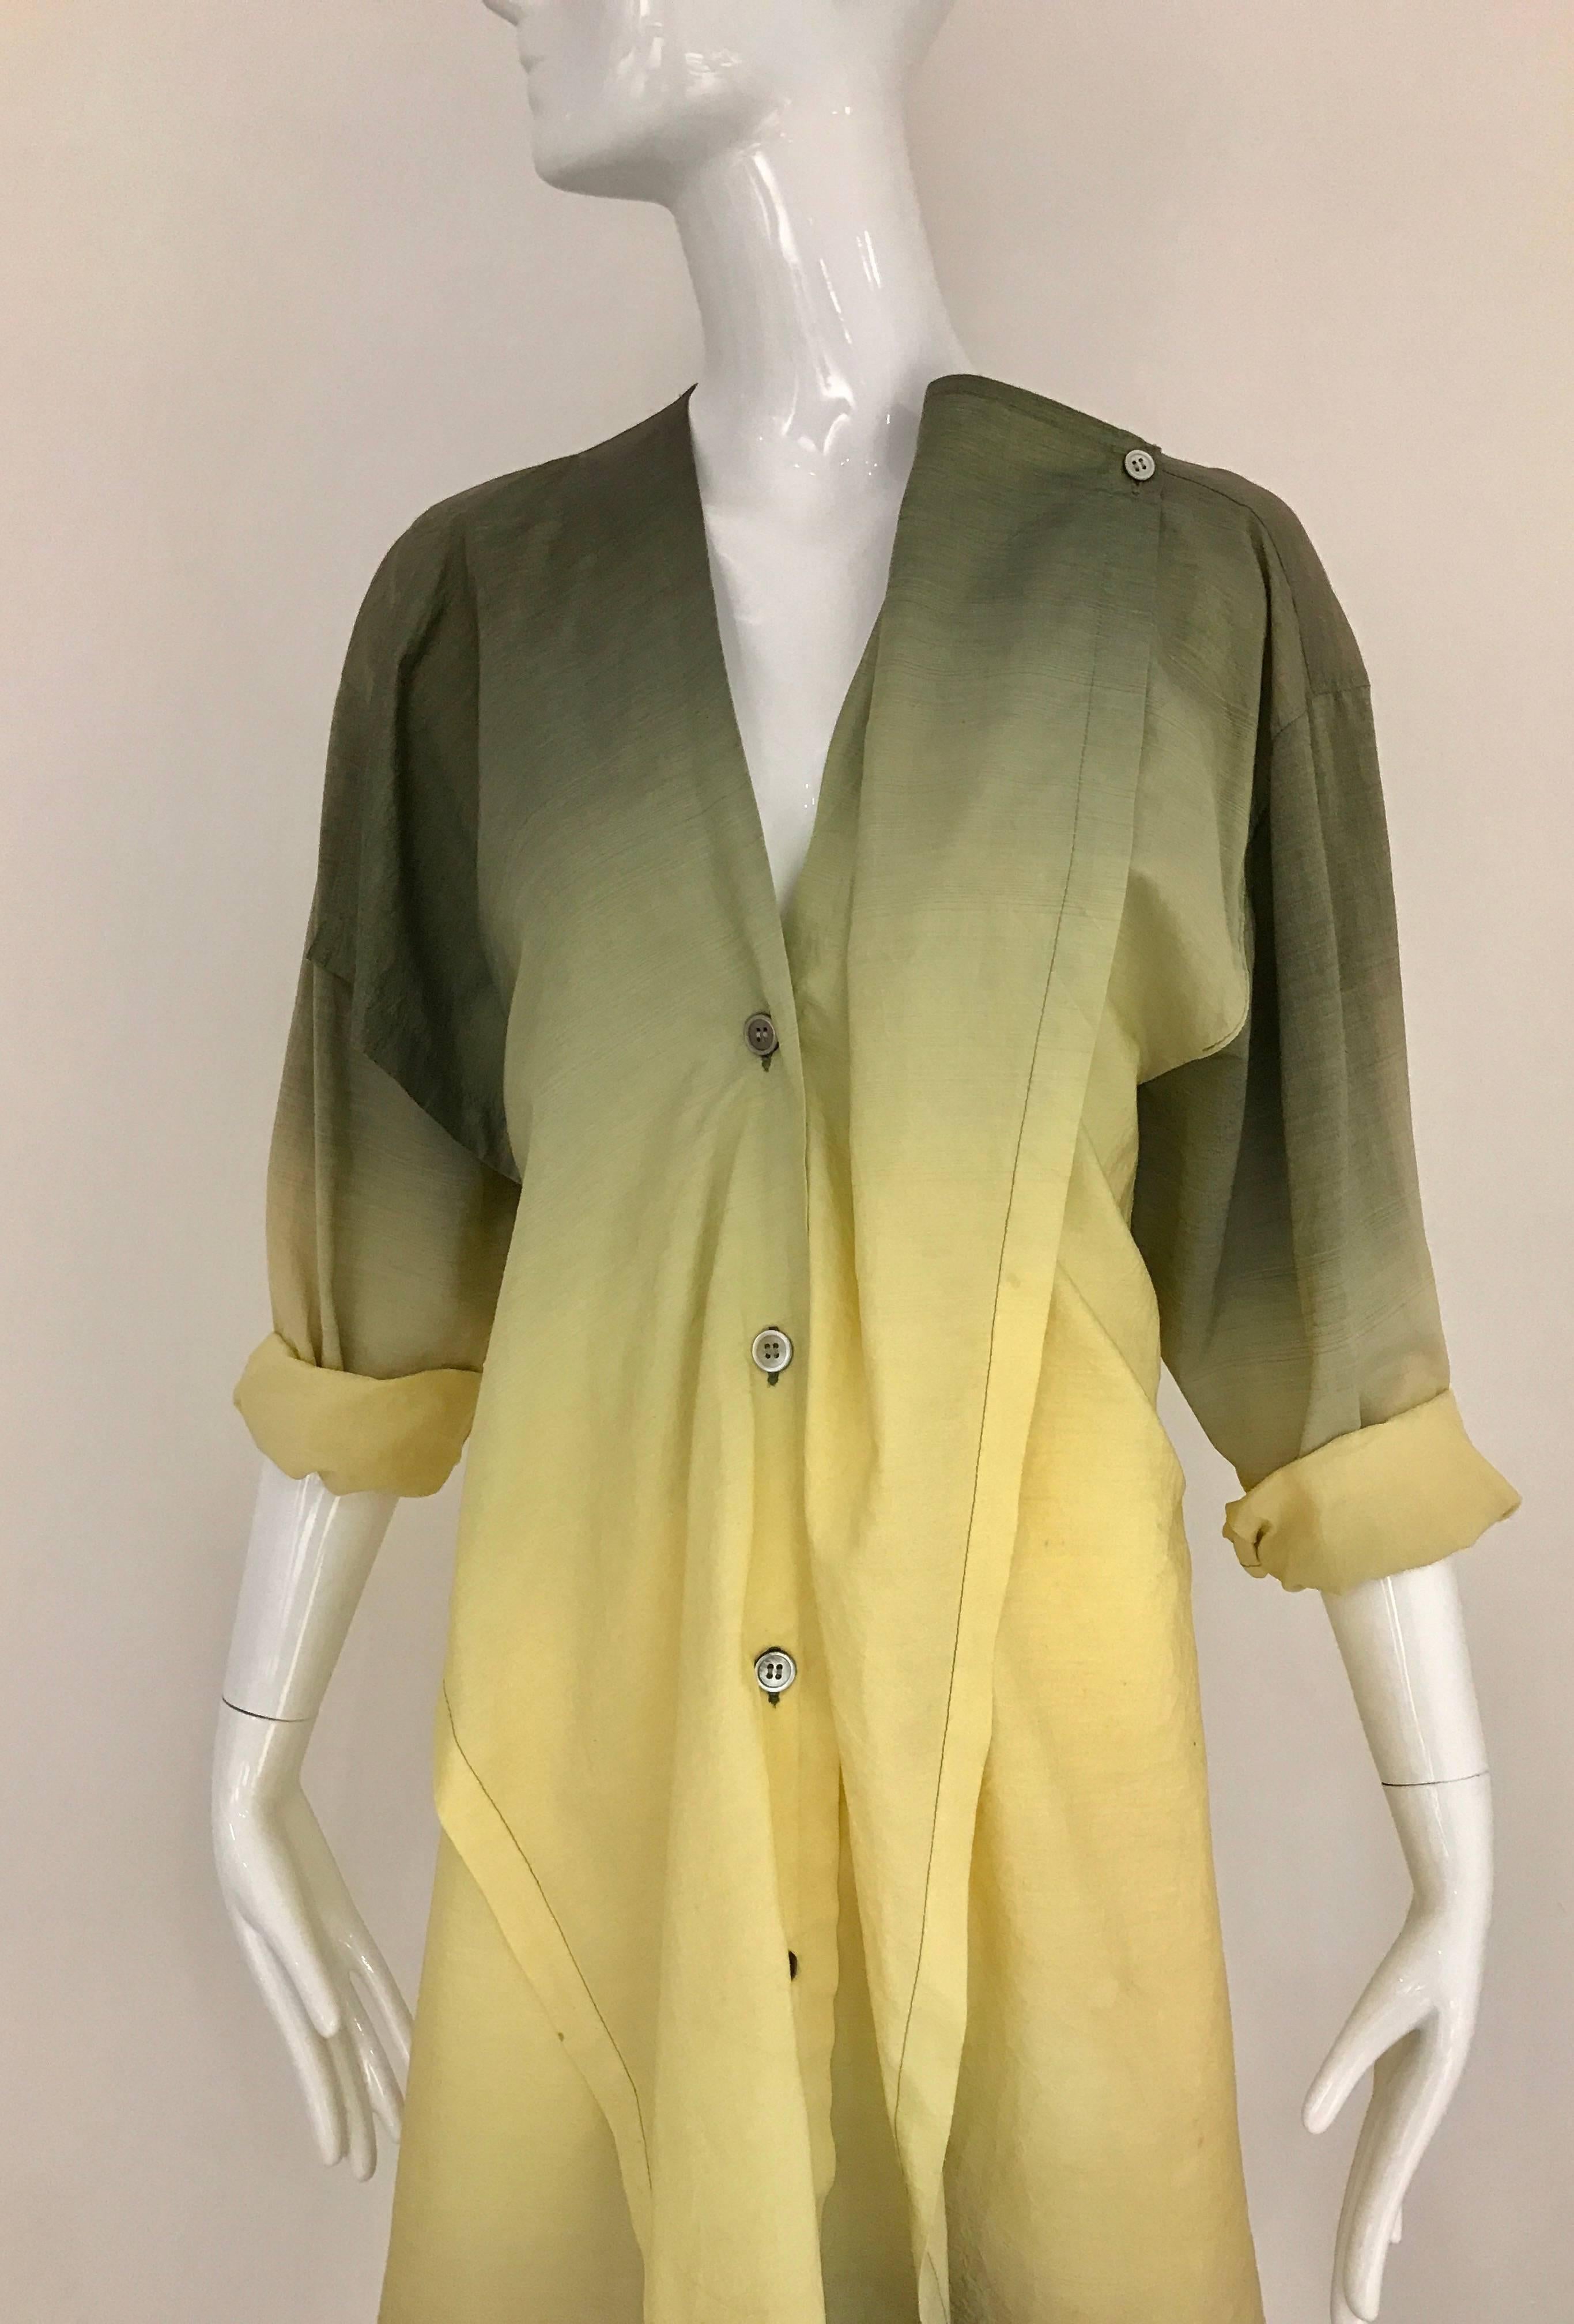 Women's 1990s ISSEY MIYAKE Green and Yellow Ombré 90s Cotton Vintage Dress